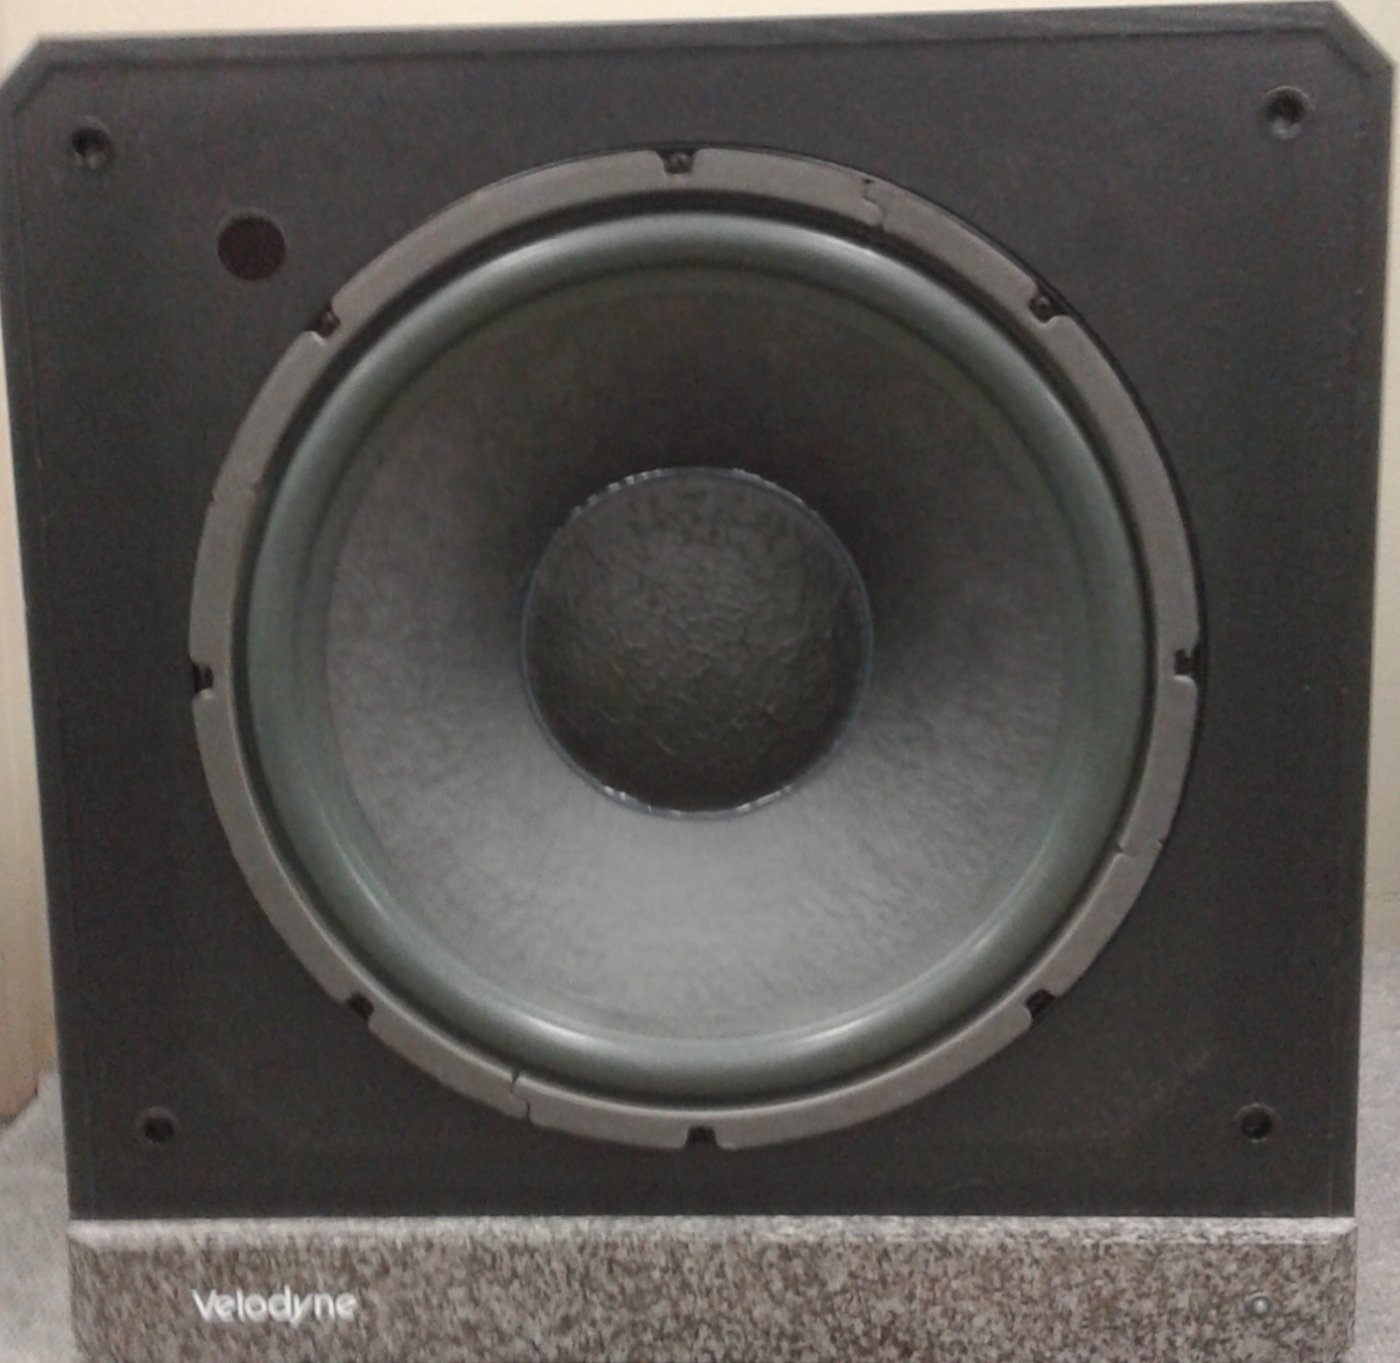 The Buy and Sell Store on Twitter: "Some serious bass for the home audio This Velodyne subwoofer measures 15 inch in with 250 watt output. An oldie with fantastic quality.